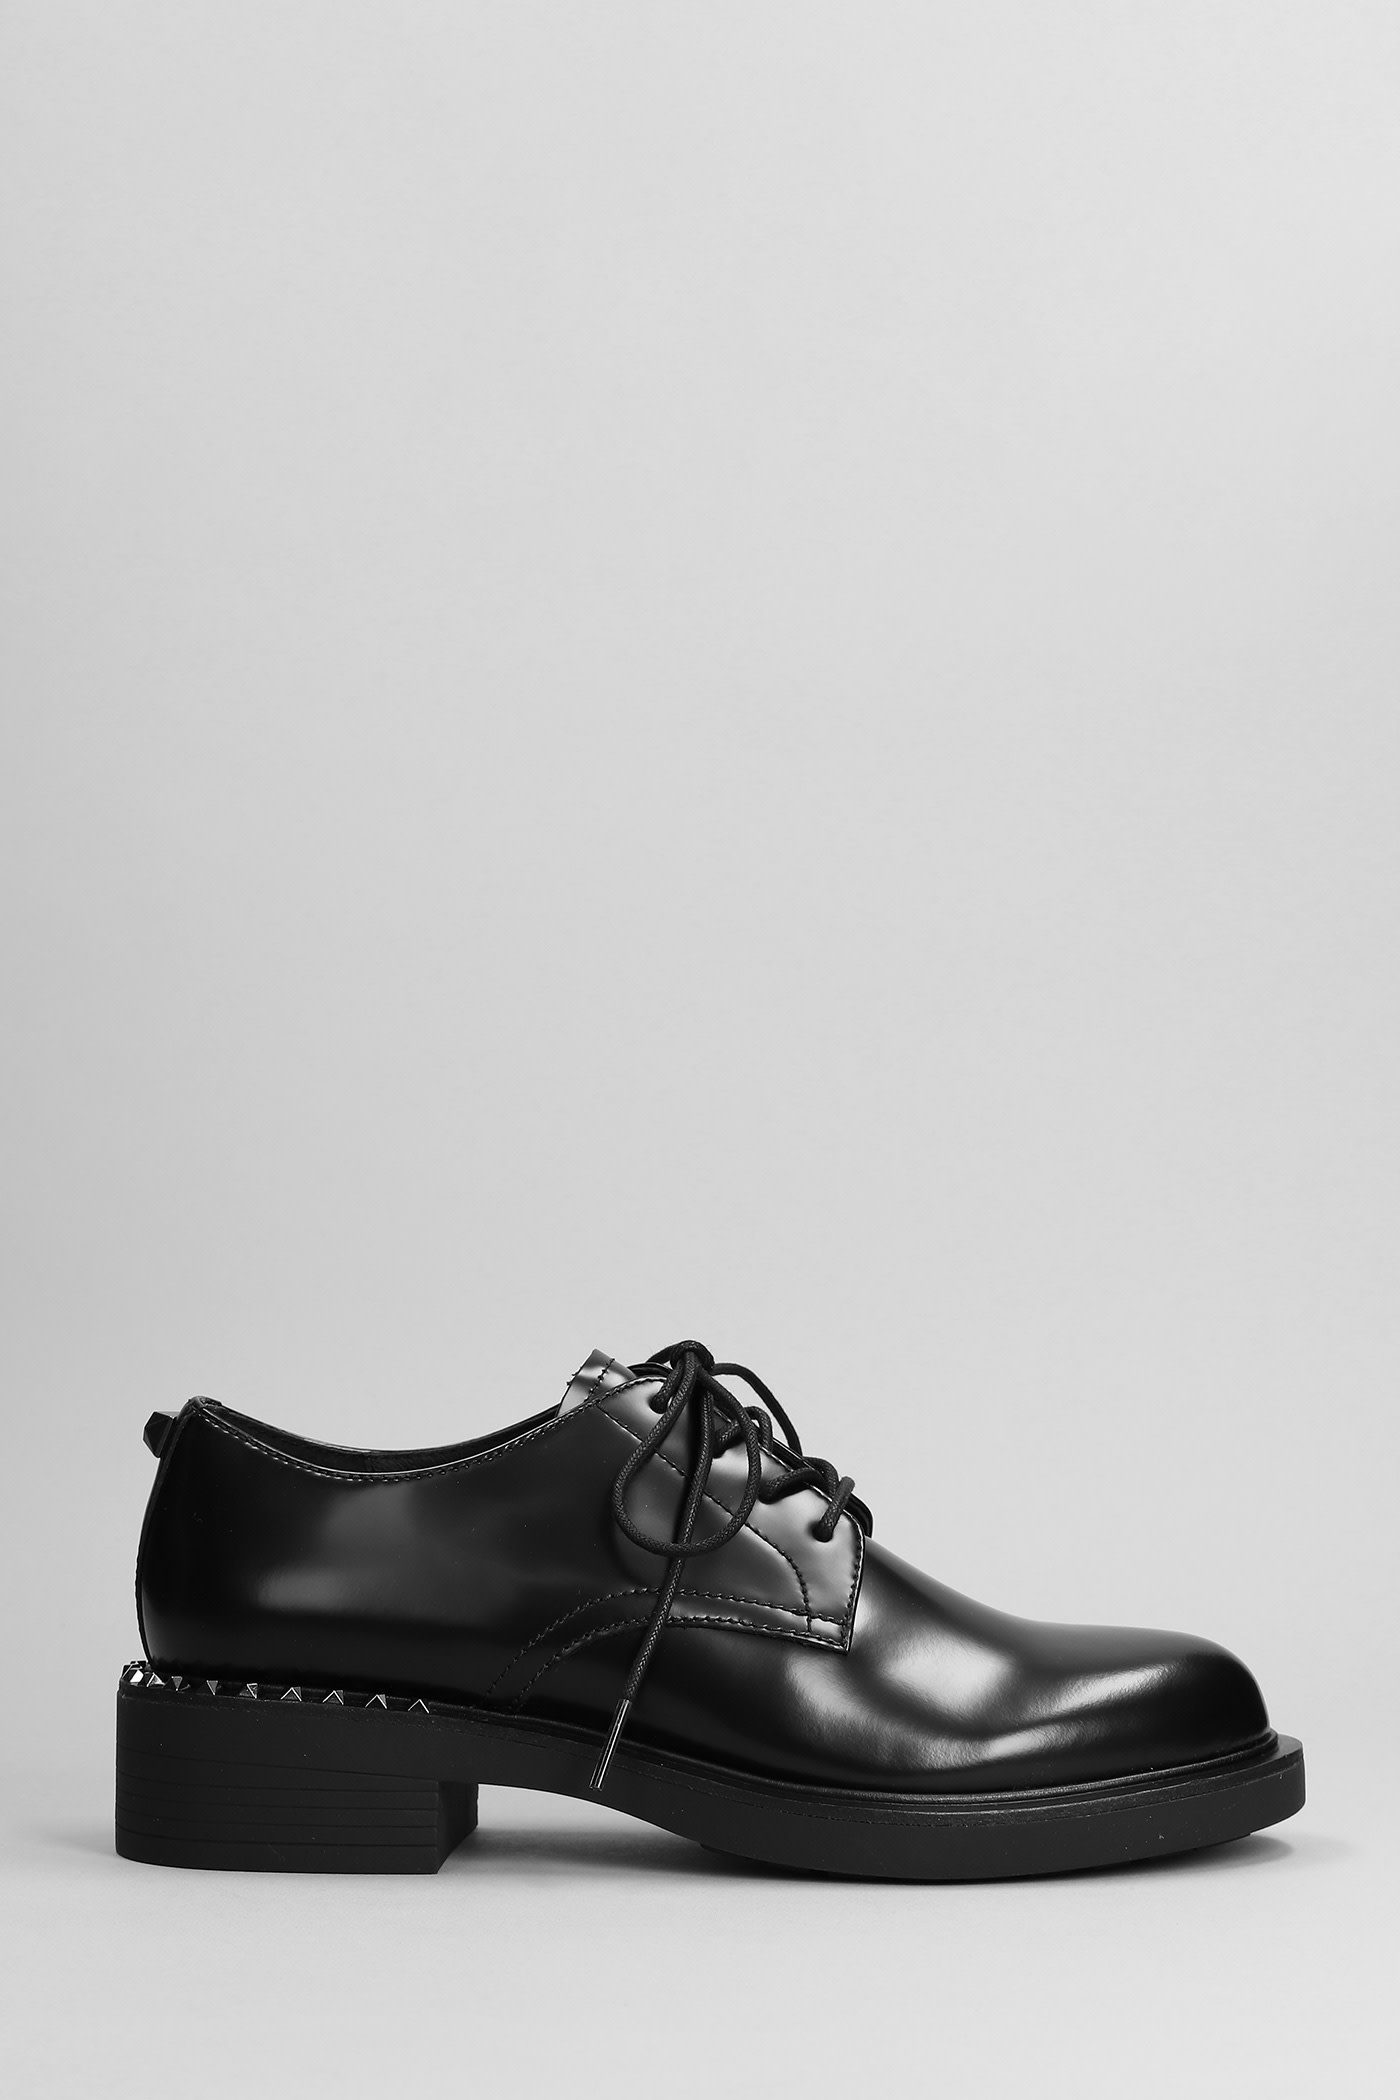 ASH FREAK LACE UP SHOES IN BLACK LEATHER